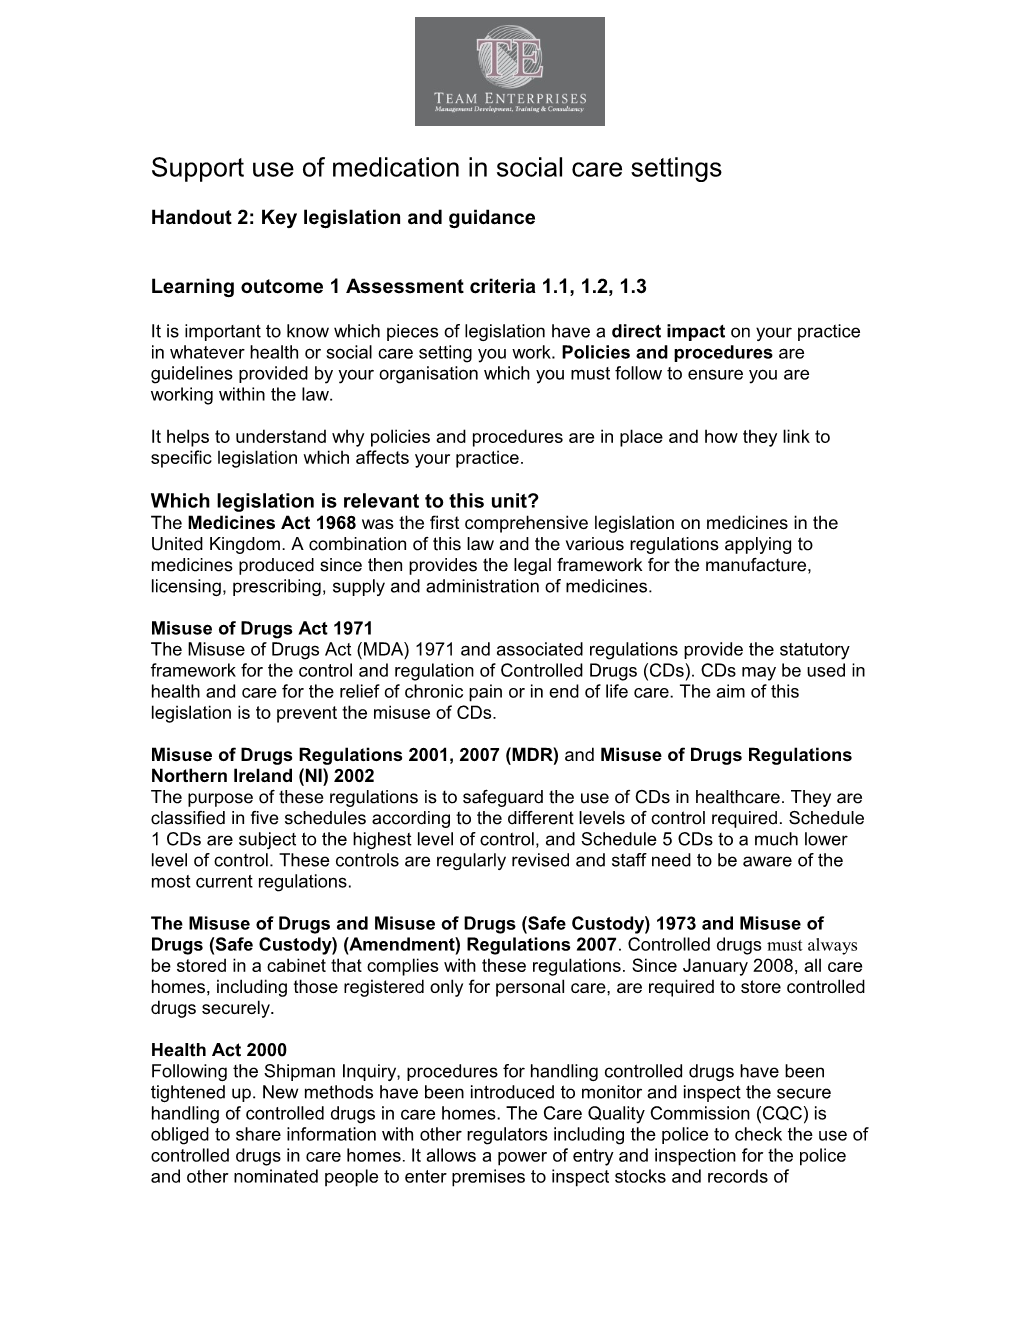 Unit 3047: Support Use of Medication in Social Care Settings